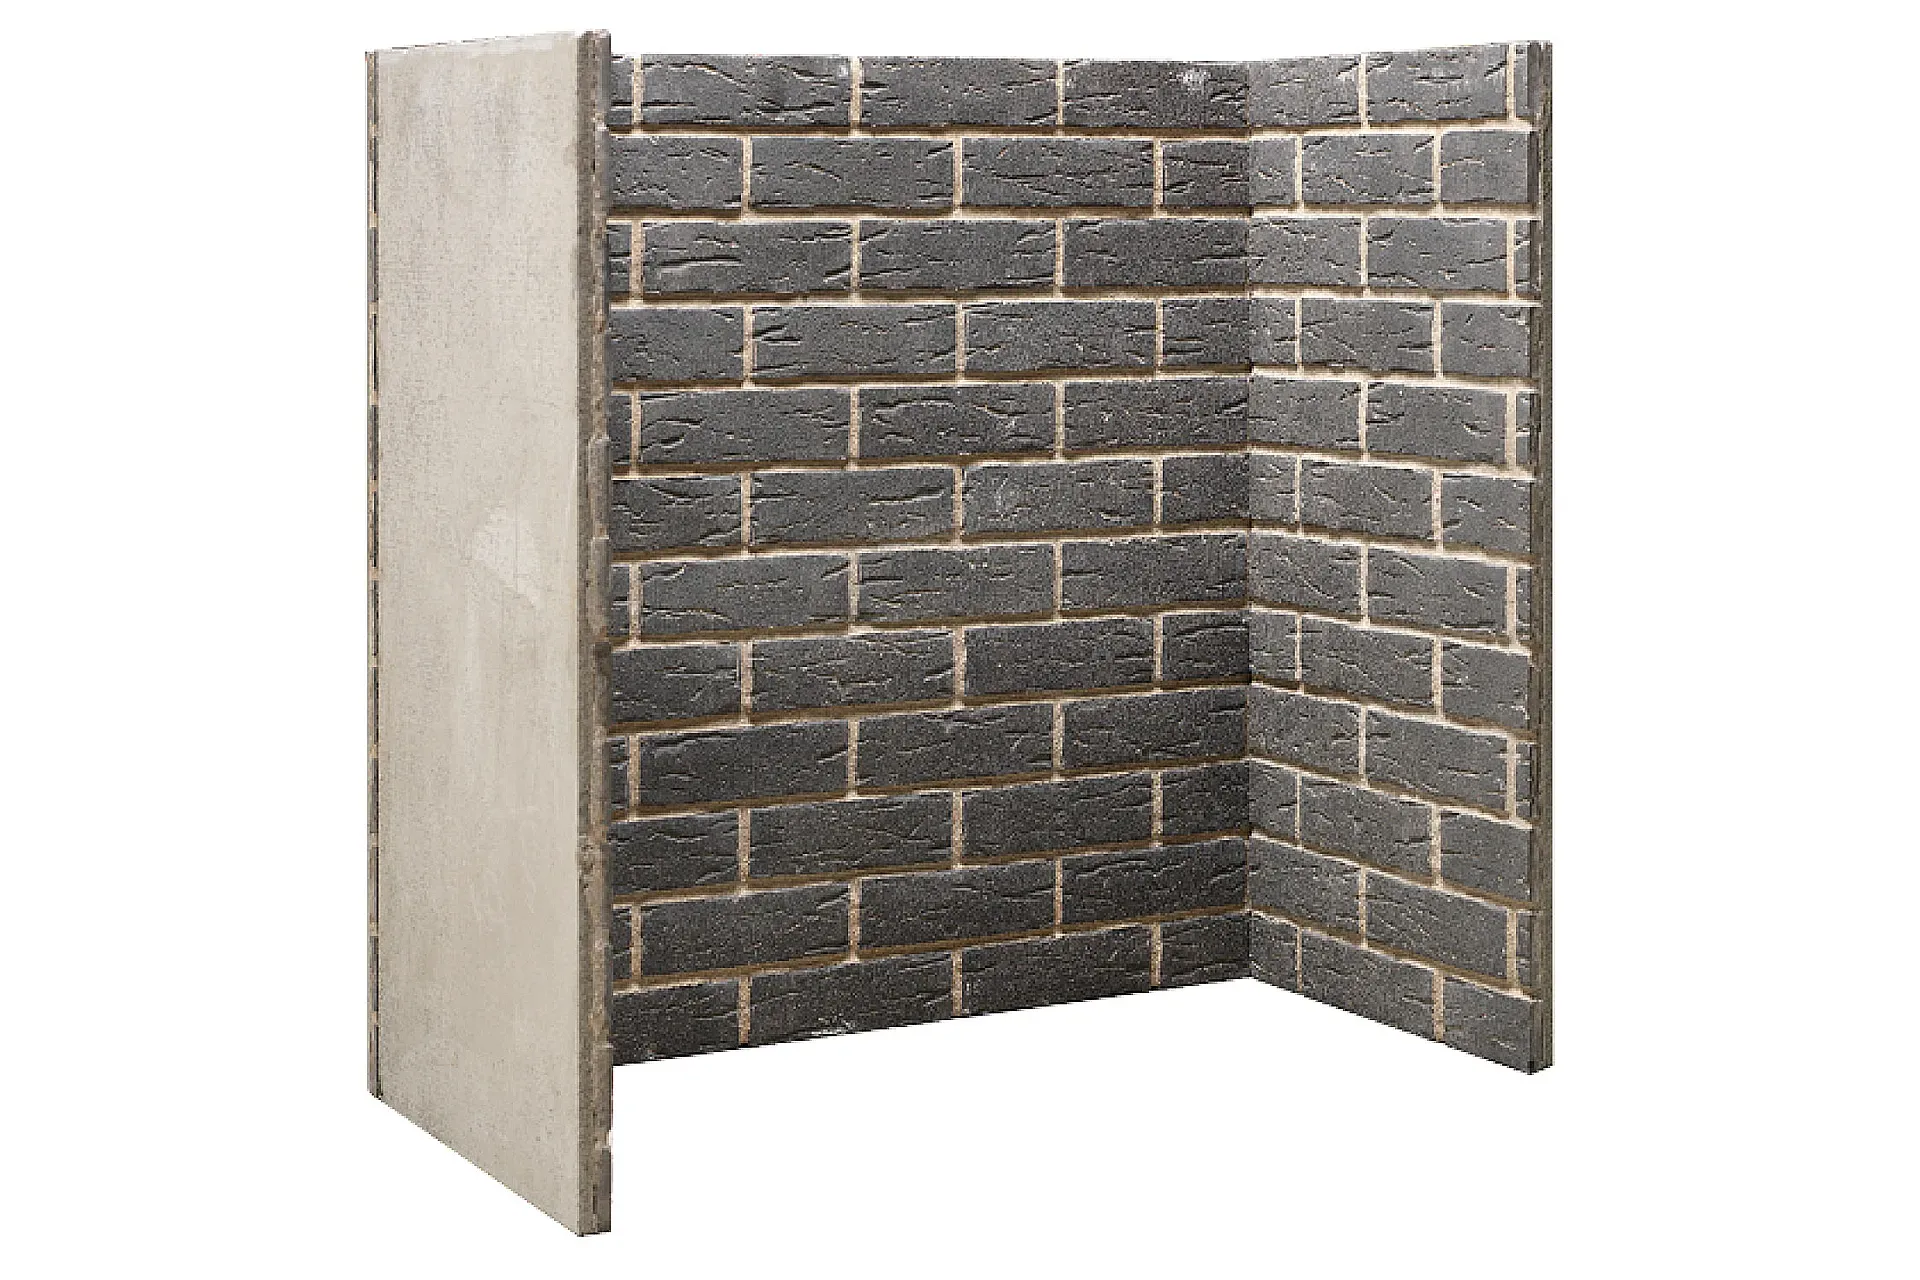 The Gallery Collection RUSTIC GREY BRICK Chamber